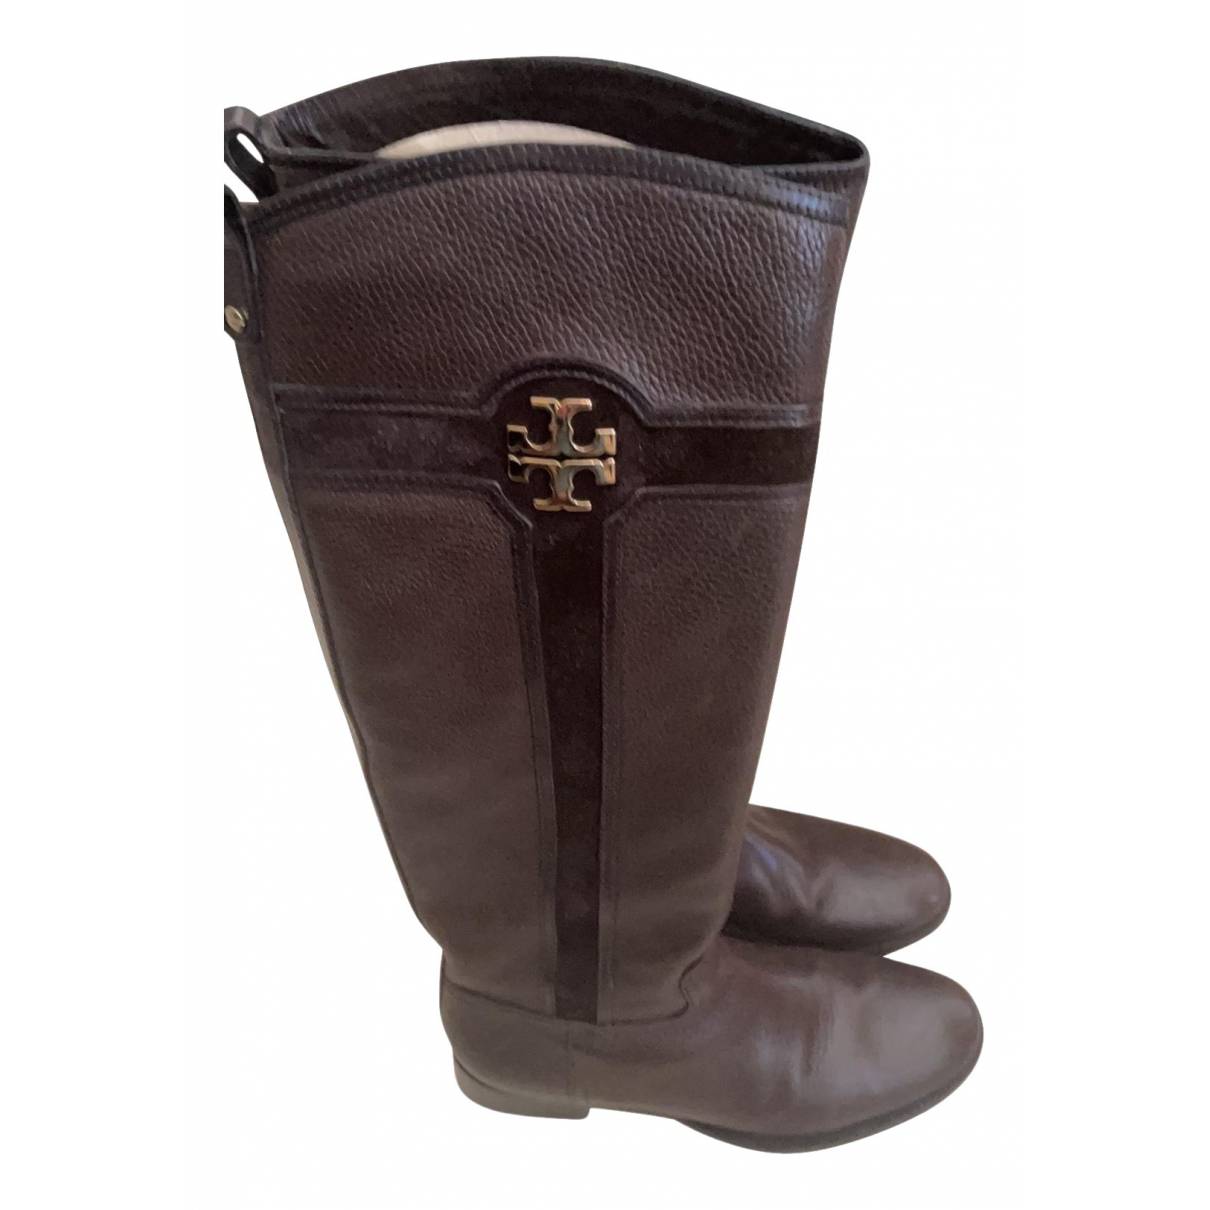 Leather boots Tory Burch Brown size 10 US in Leather - 25115199